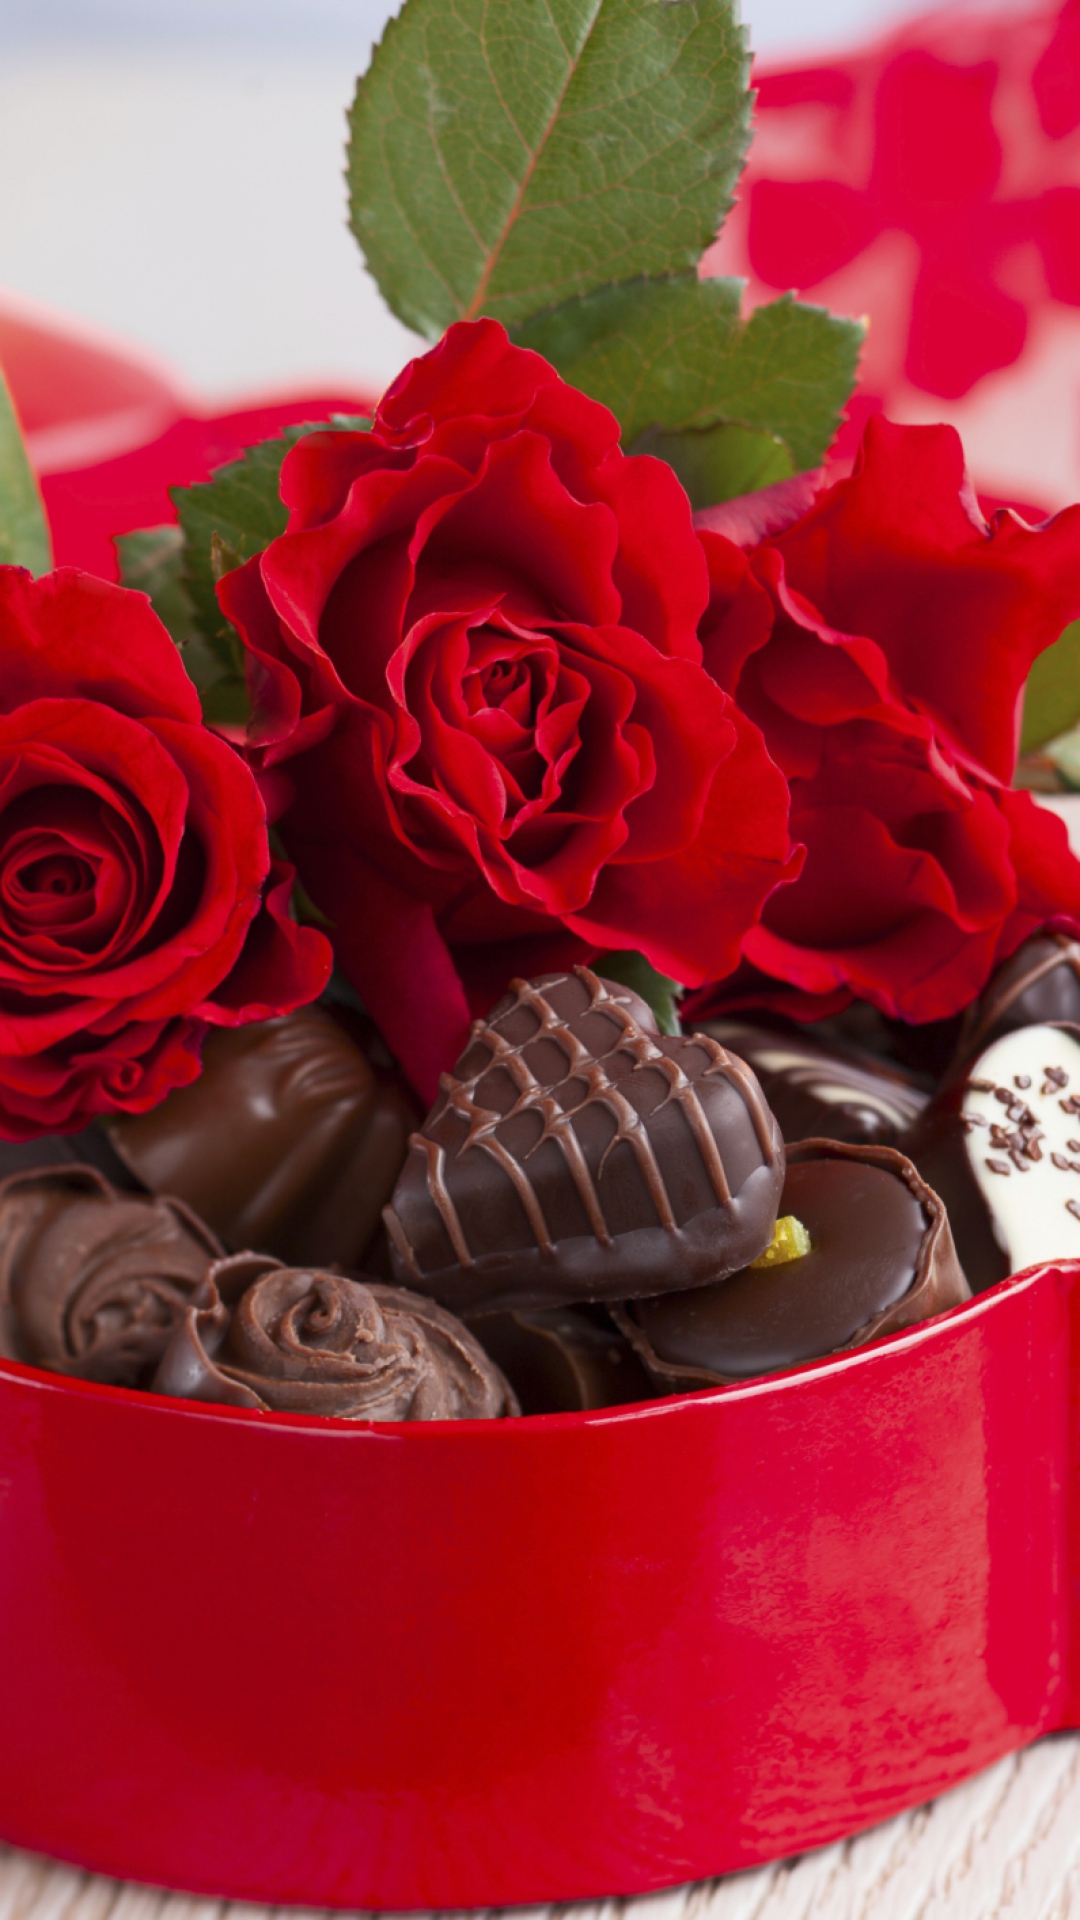 Chocolate Flower Wallpaper Flowers Healthy - Rose Valentine Day Gift , HD Wallpaper & Backgrounds